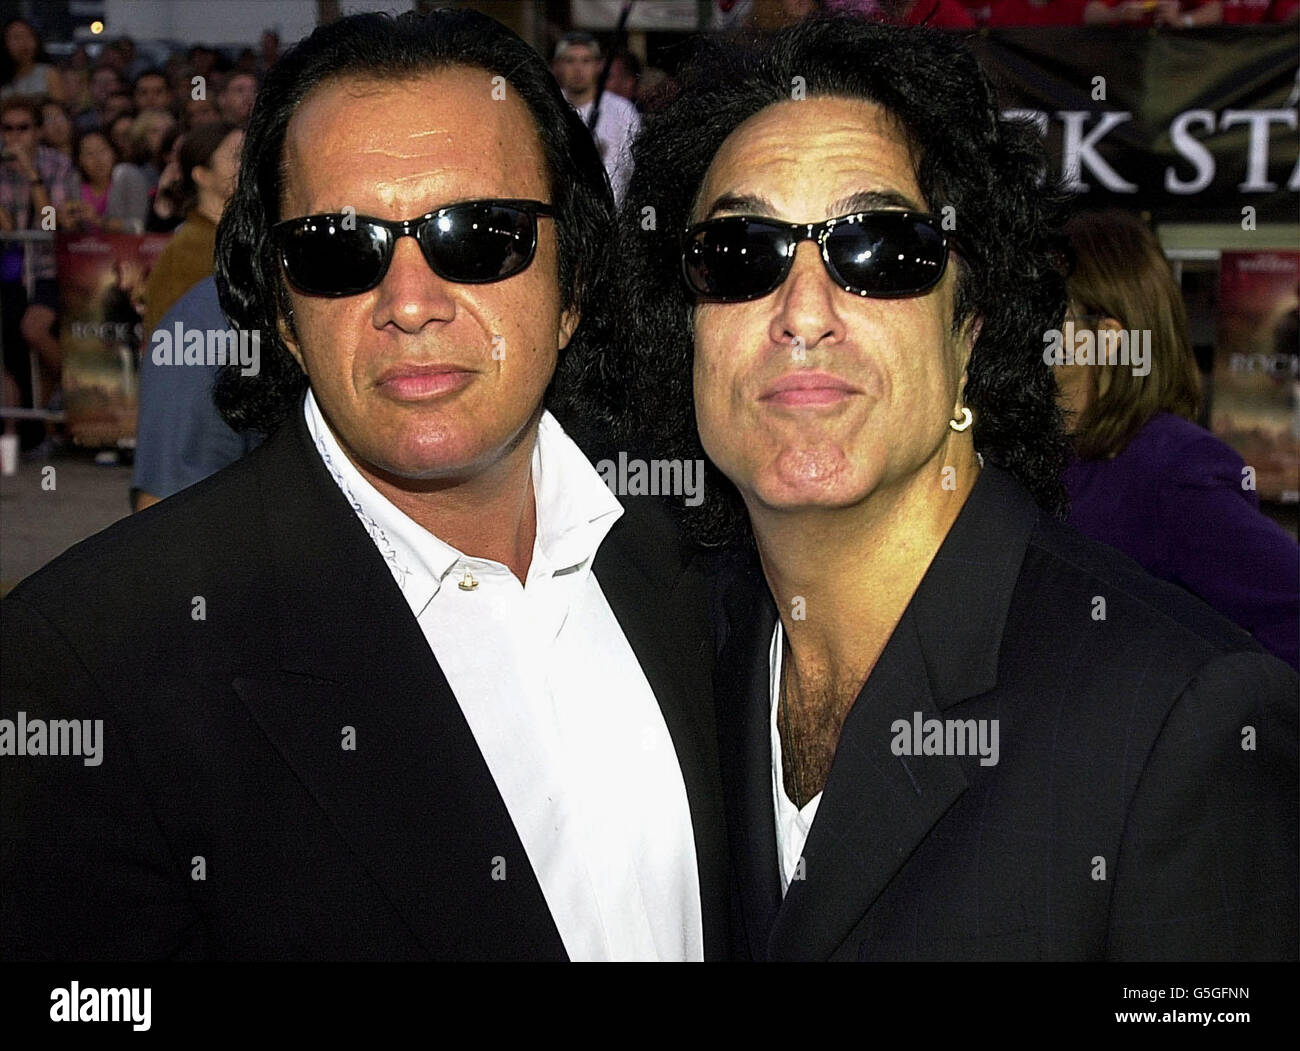 Gene Simmons, left, and Paul Stanley of the rock group Kiss arriving at the US premiere of the film Rockstar, in Los Angeles, USA. Stock Photo